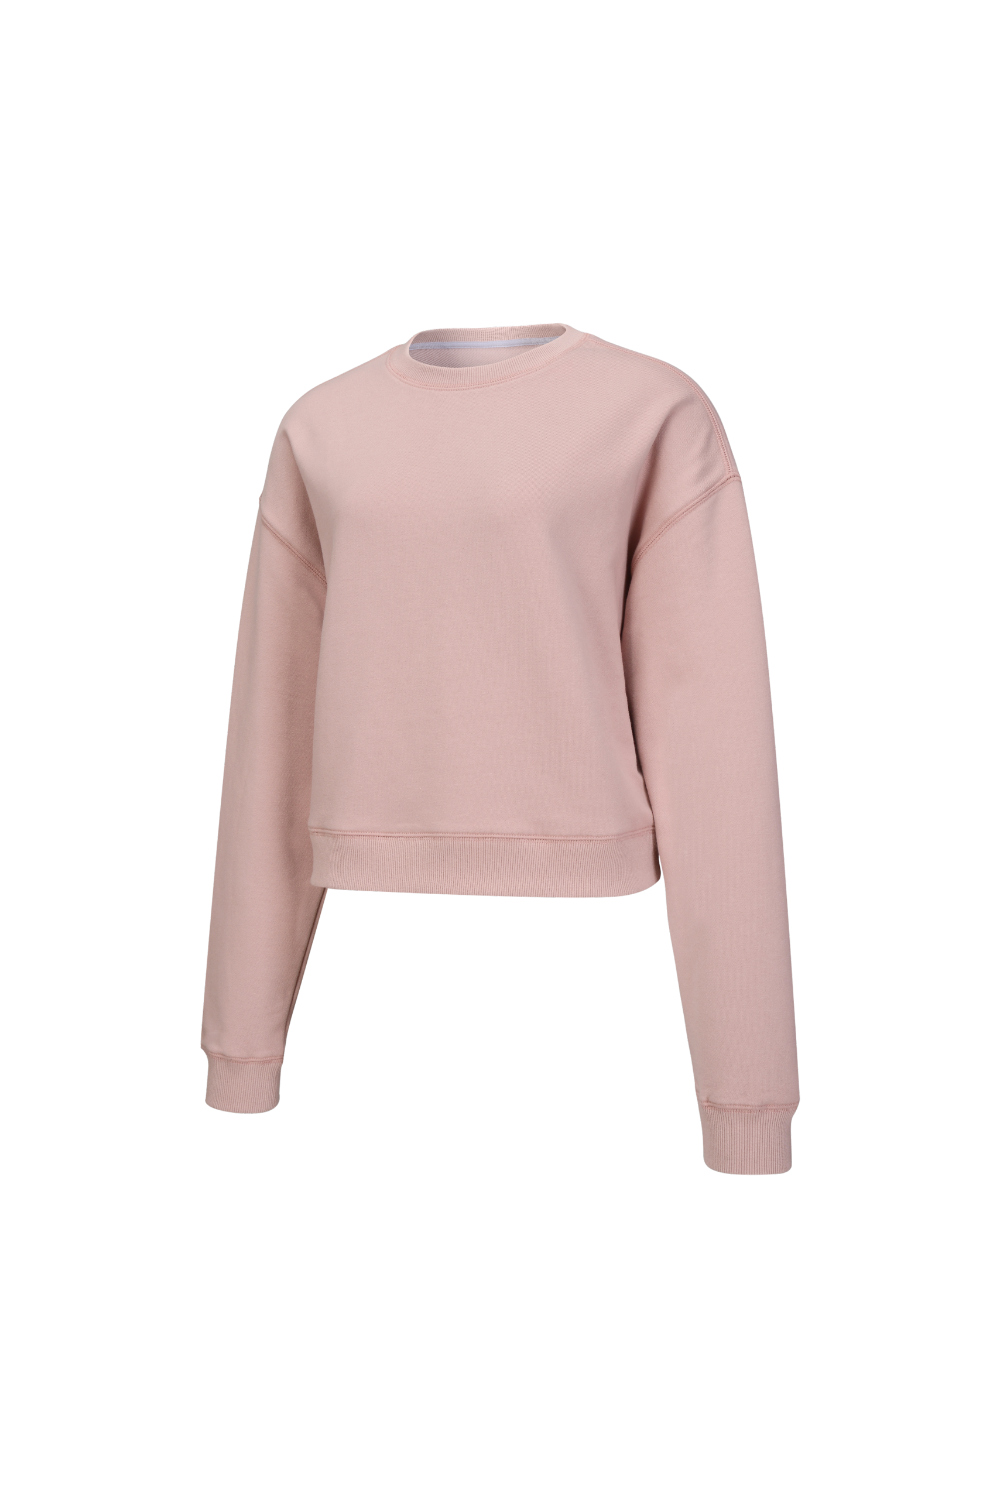 long sleeved tee baby pink color image-S1L74